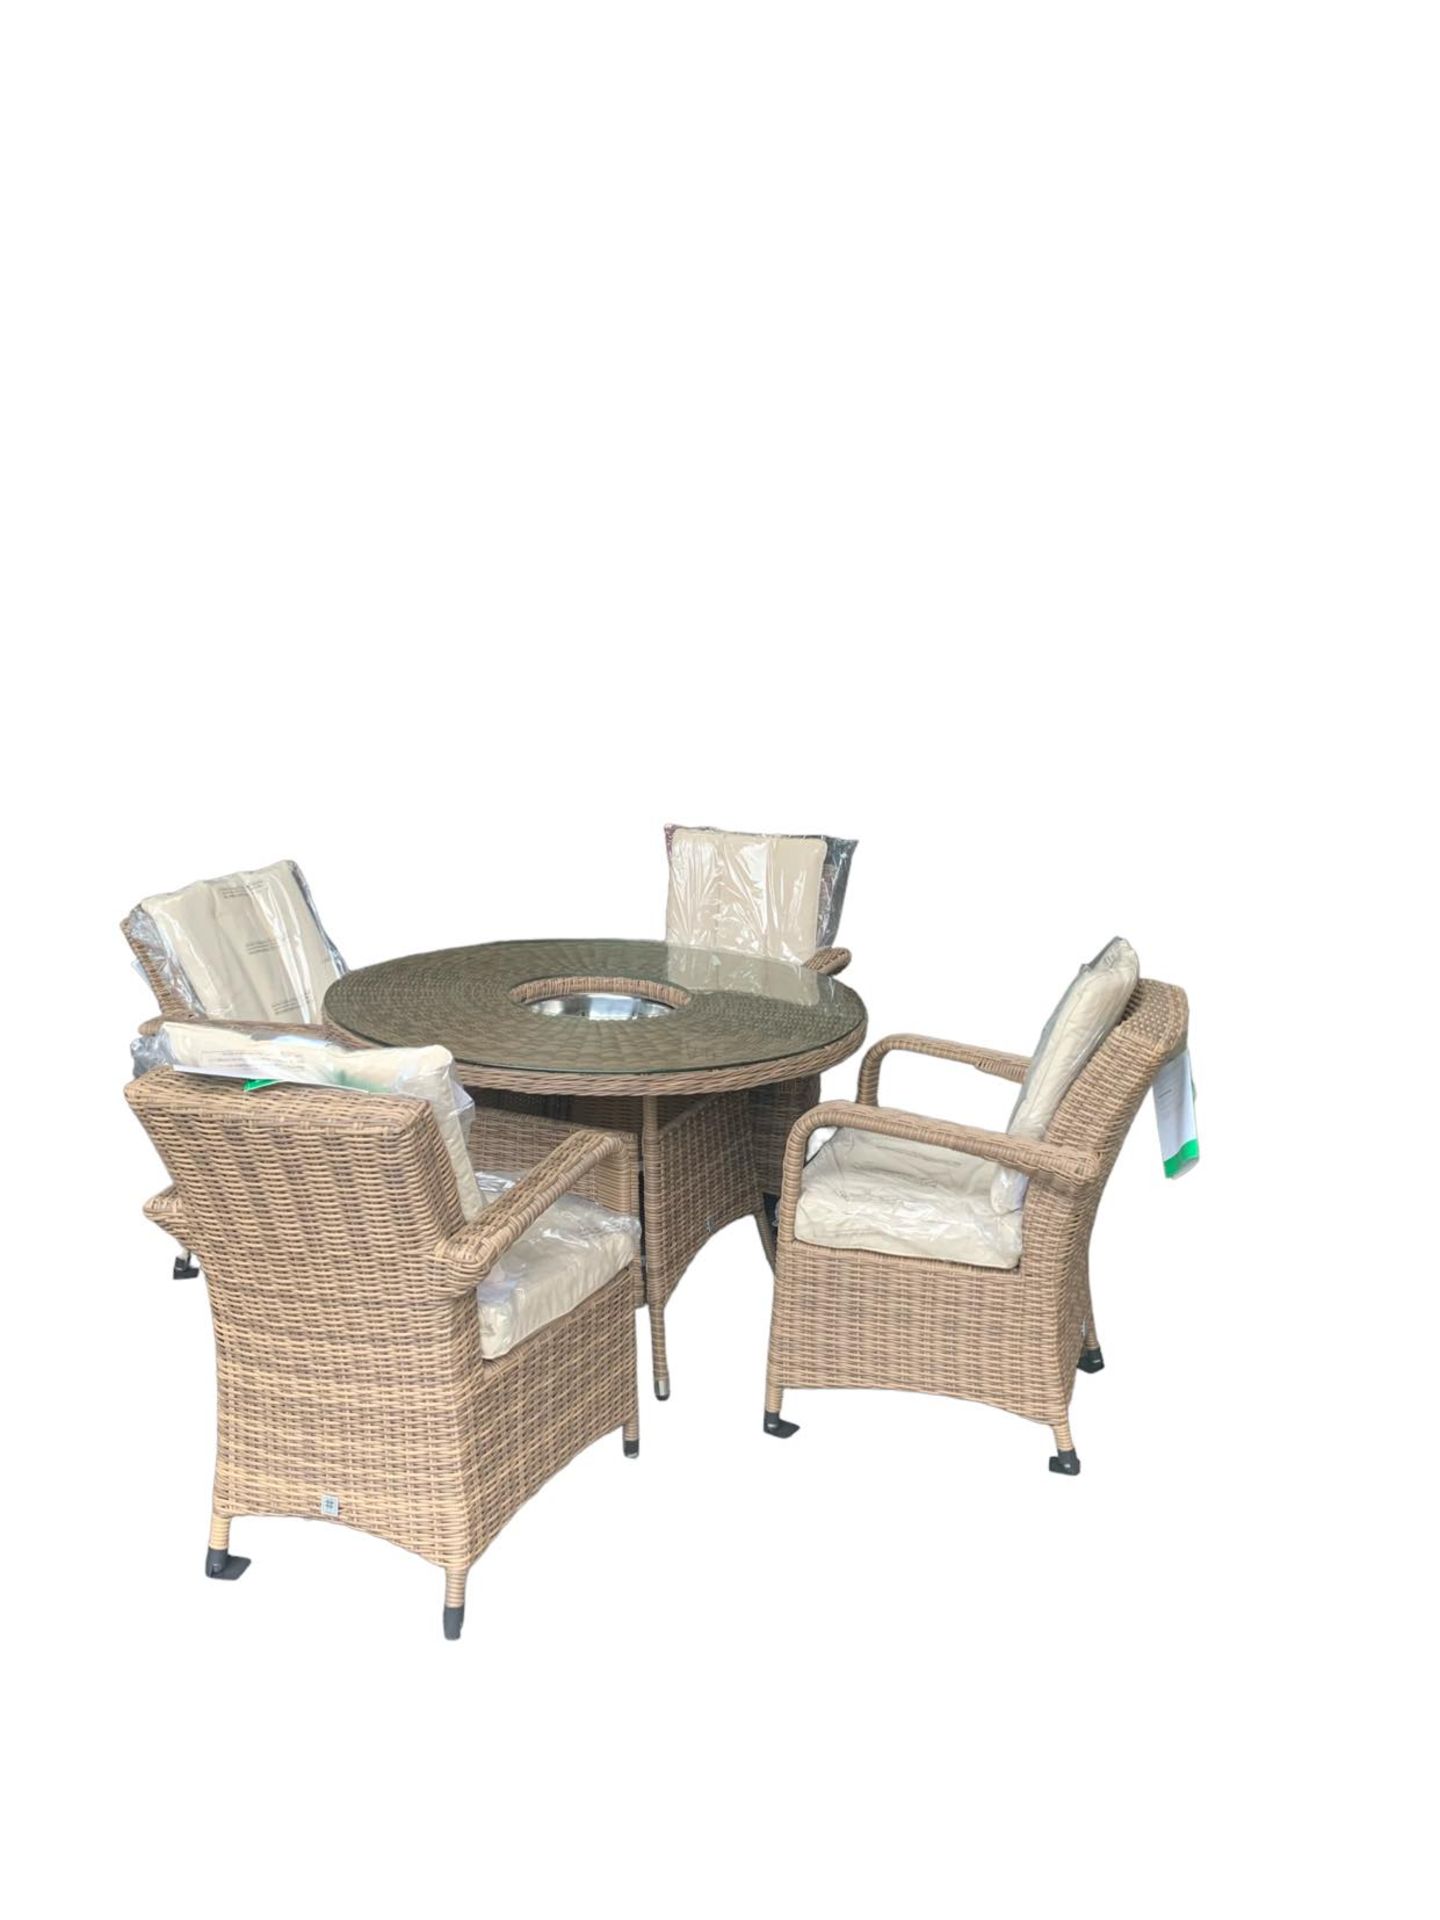 RATTAN SET 4 CHAIRS AND TABLE + ICEBUCKET+RAIN COVER - Image 4 of 5